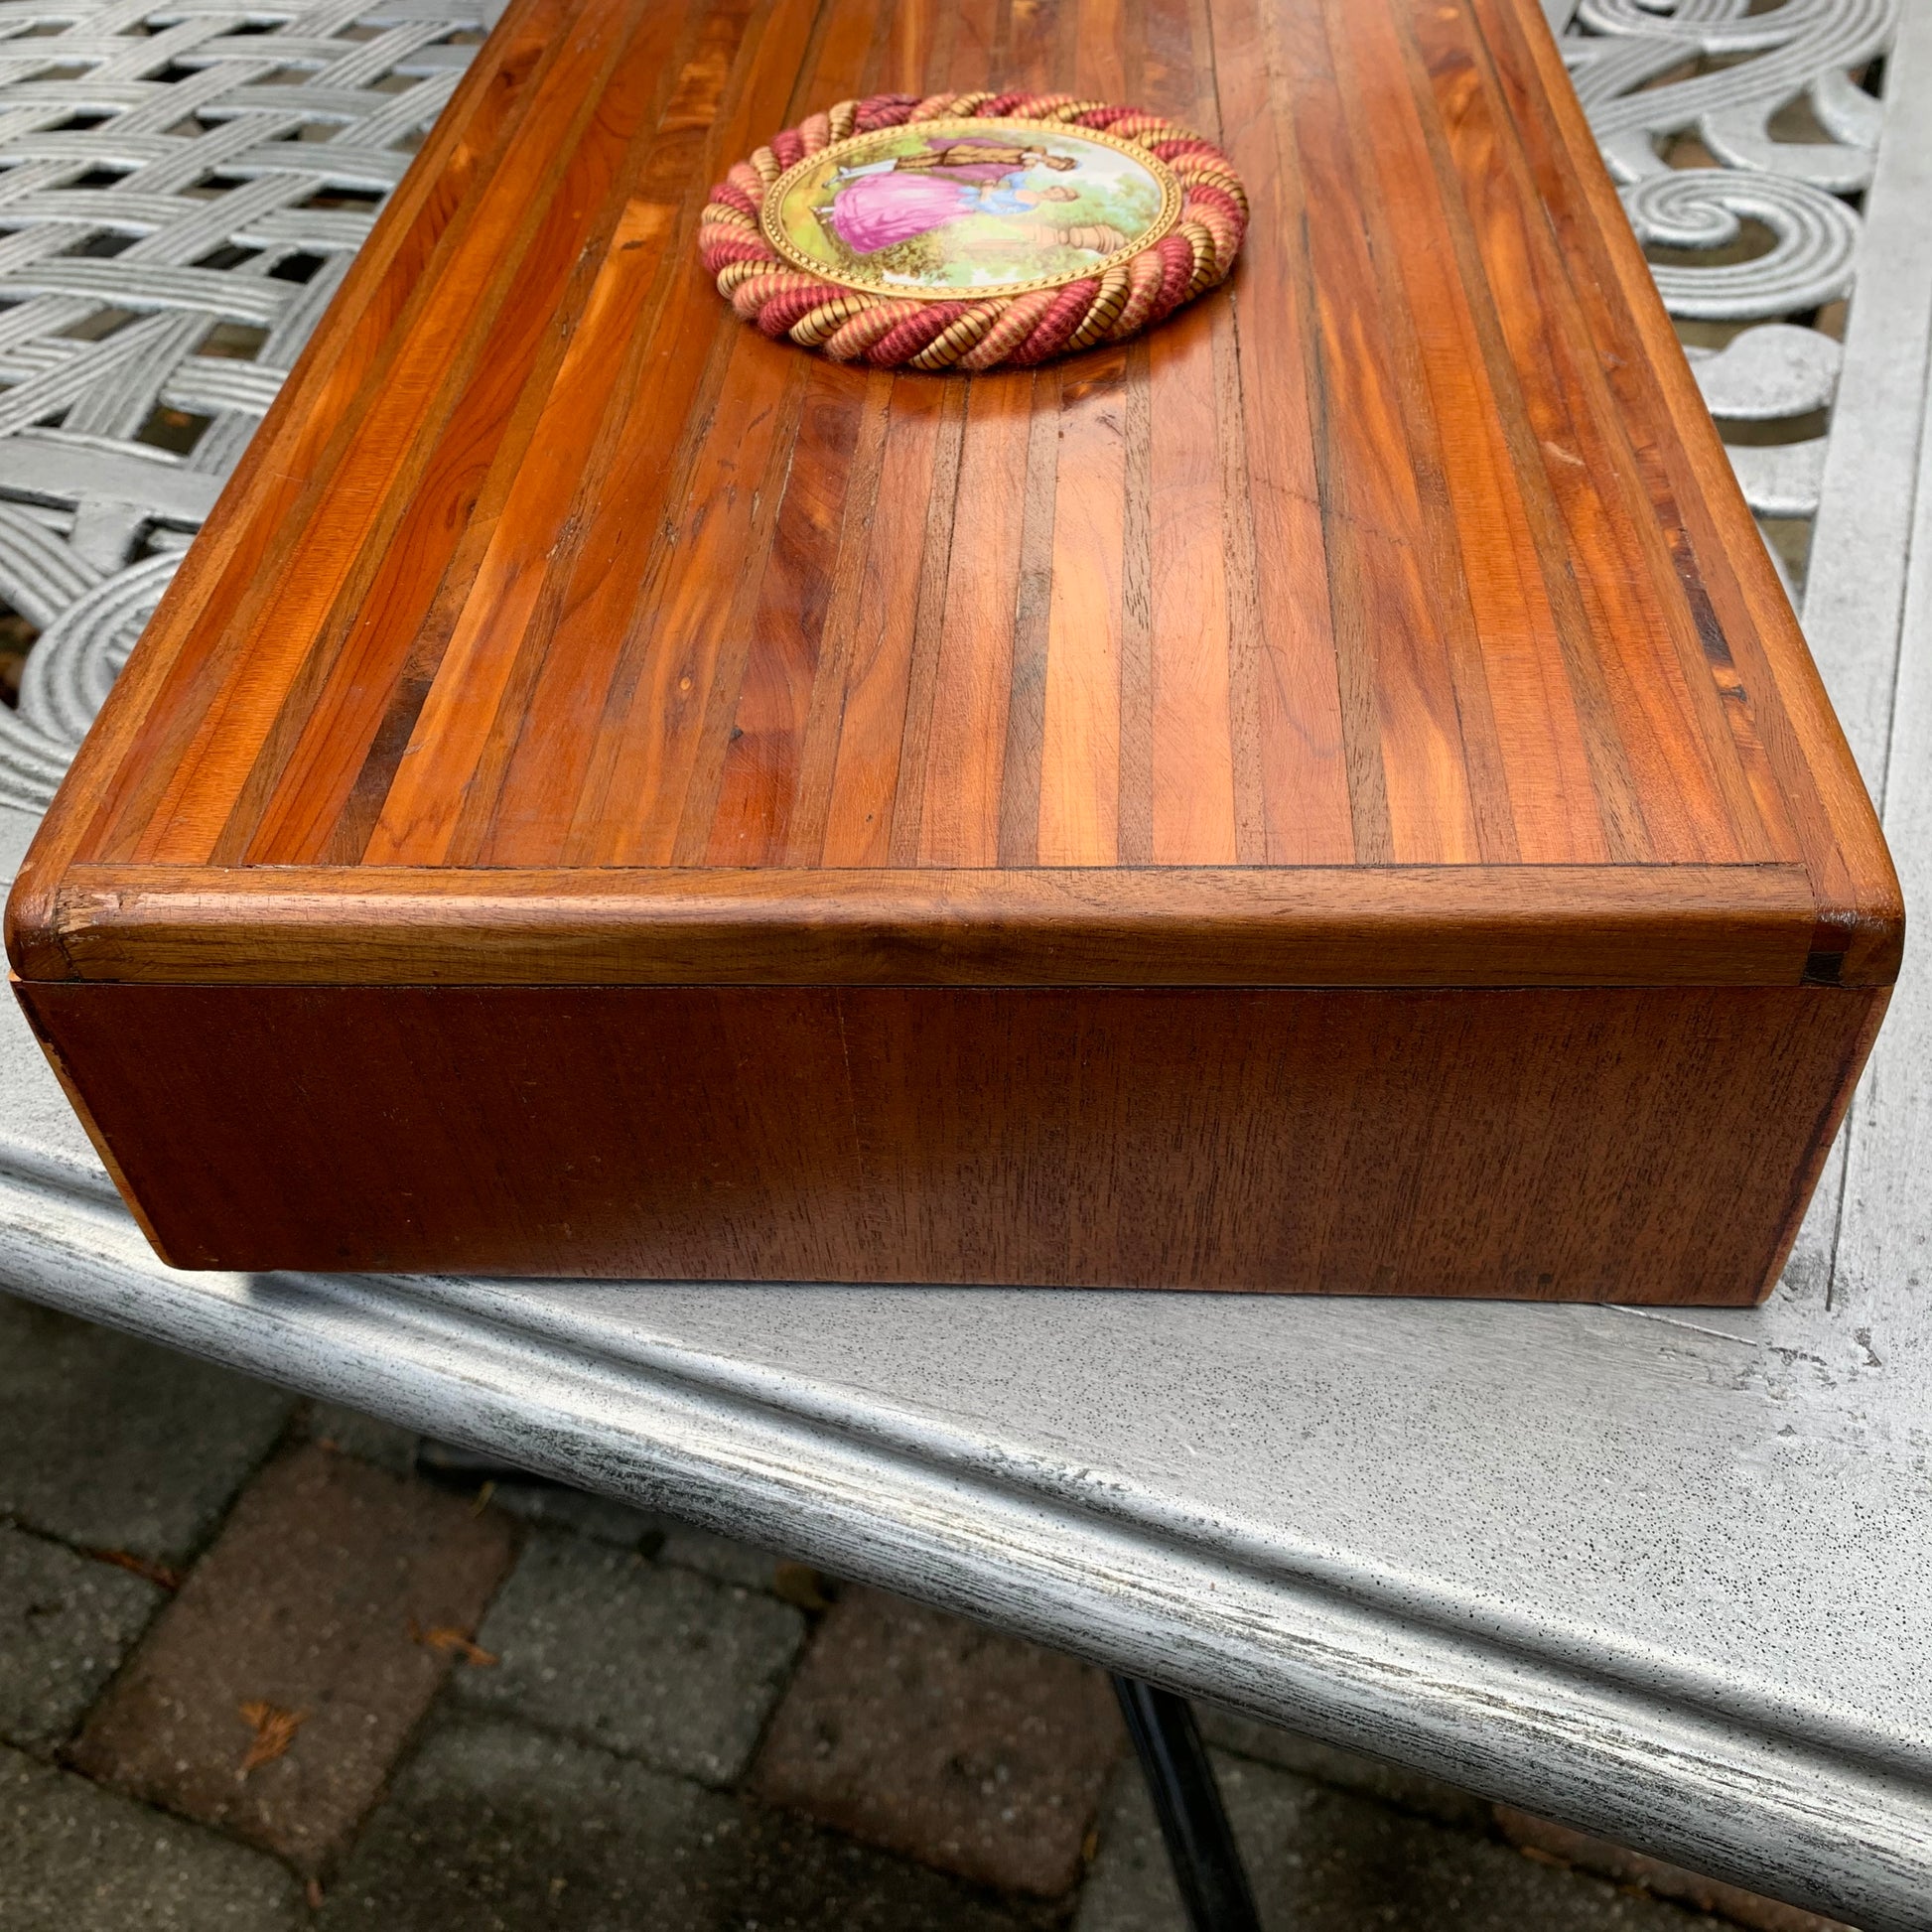 Lady Slippers Romantic Wooden Jewelry Box